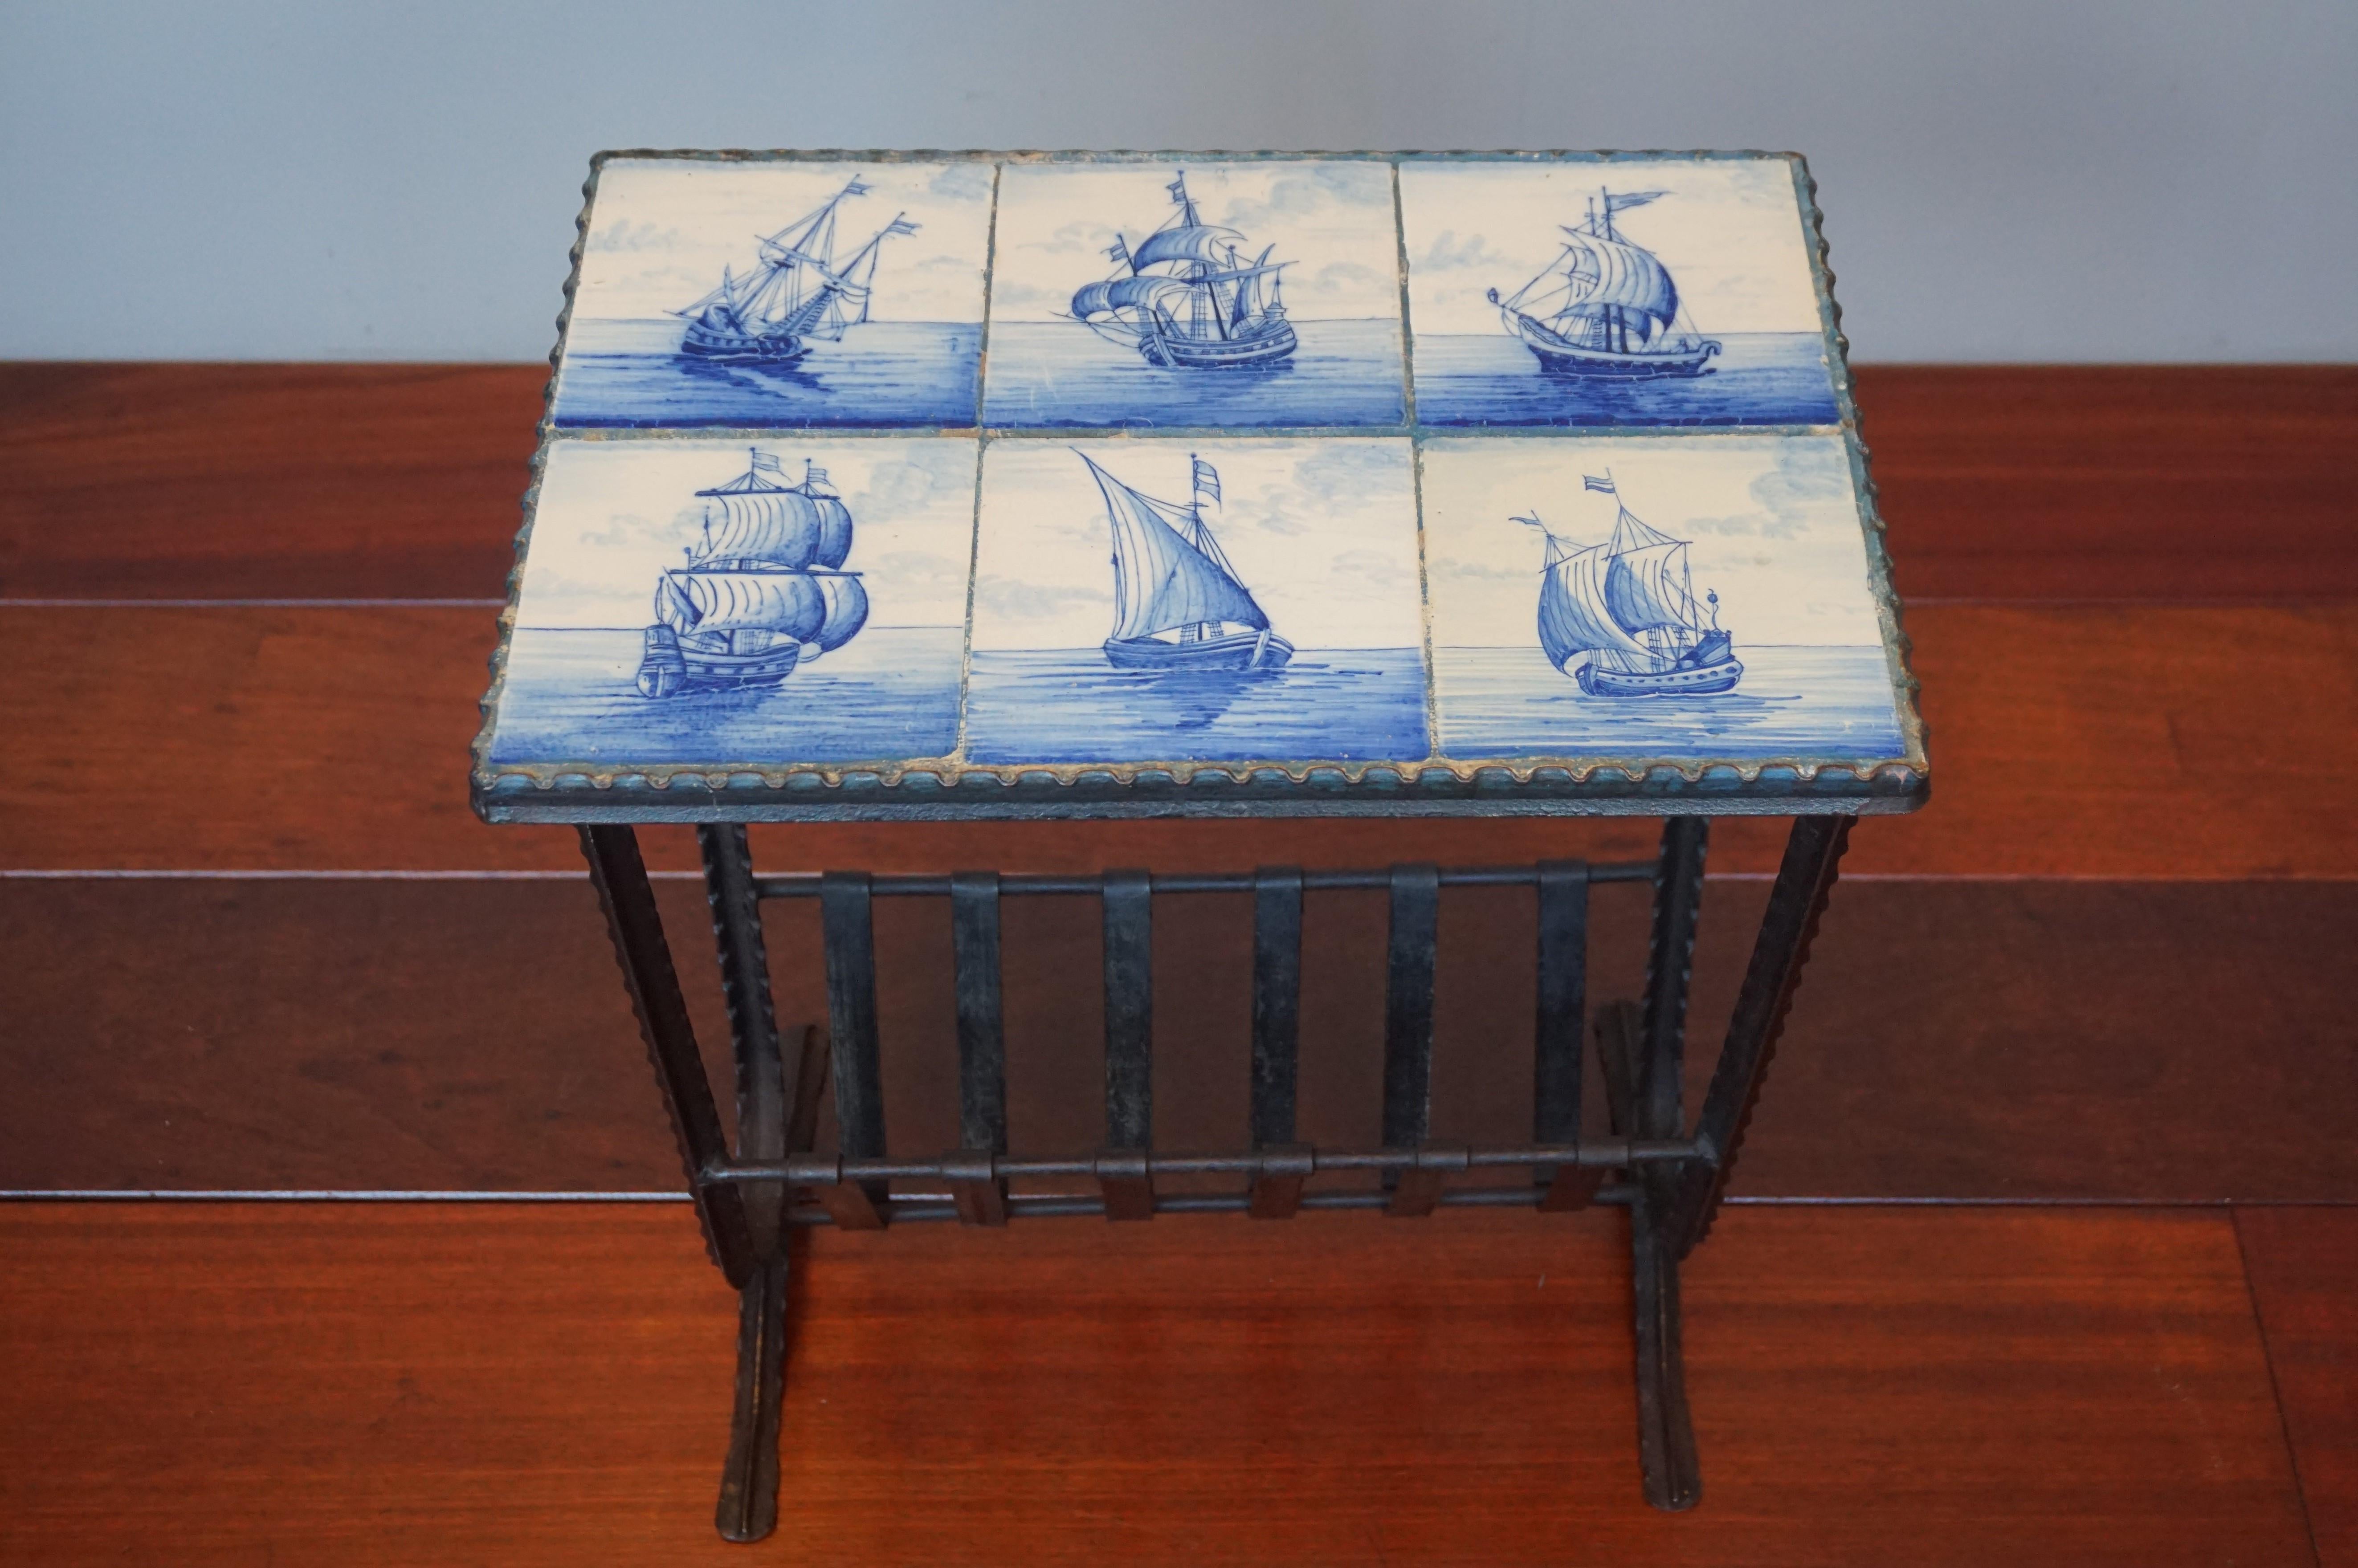 Hand-Painted Early 1900s Wrought Iron & Delftware Tiles Table with Hand Painted Ancient Ships